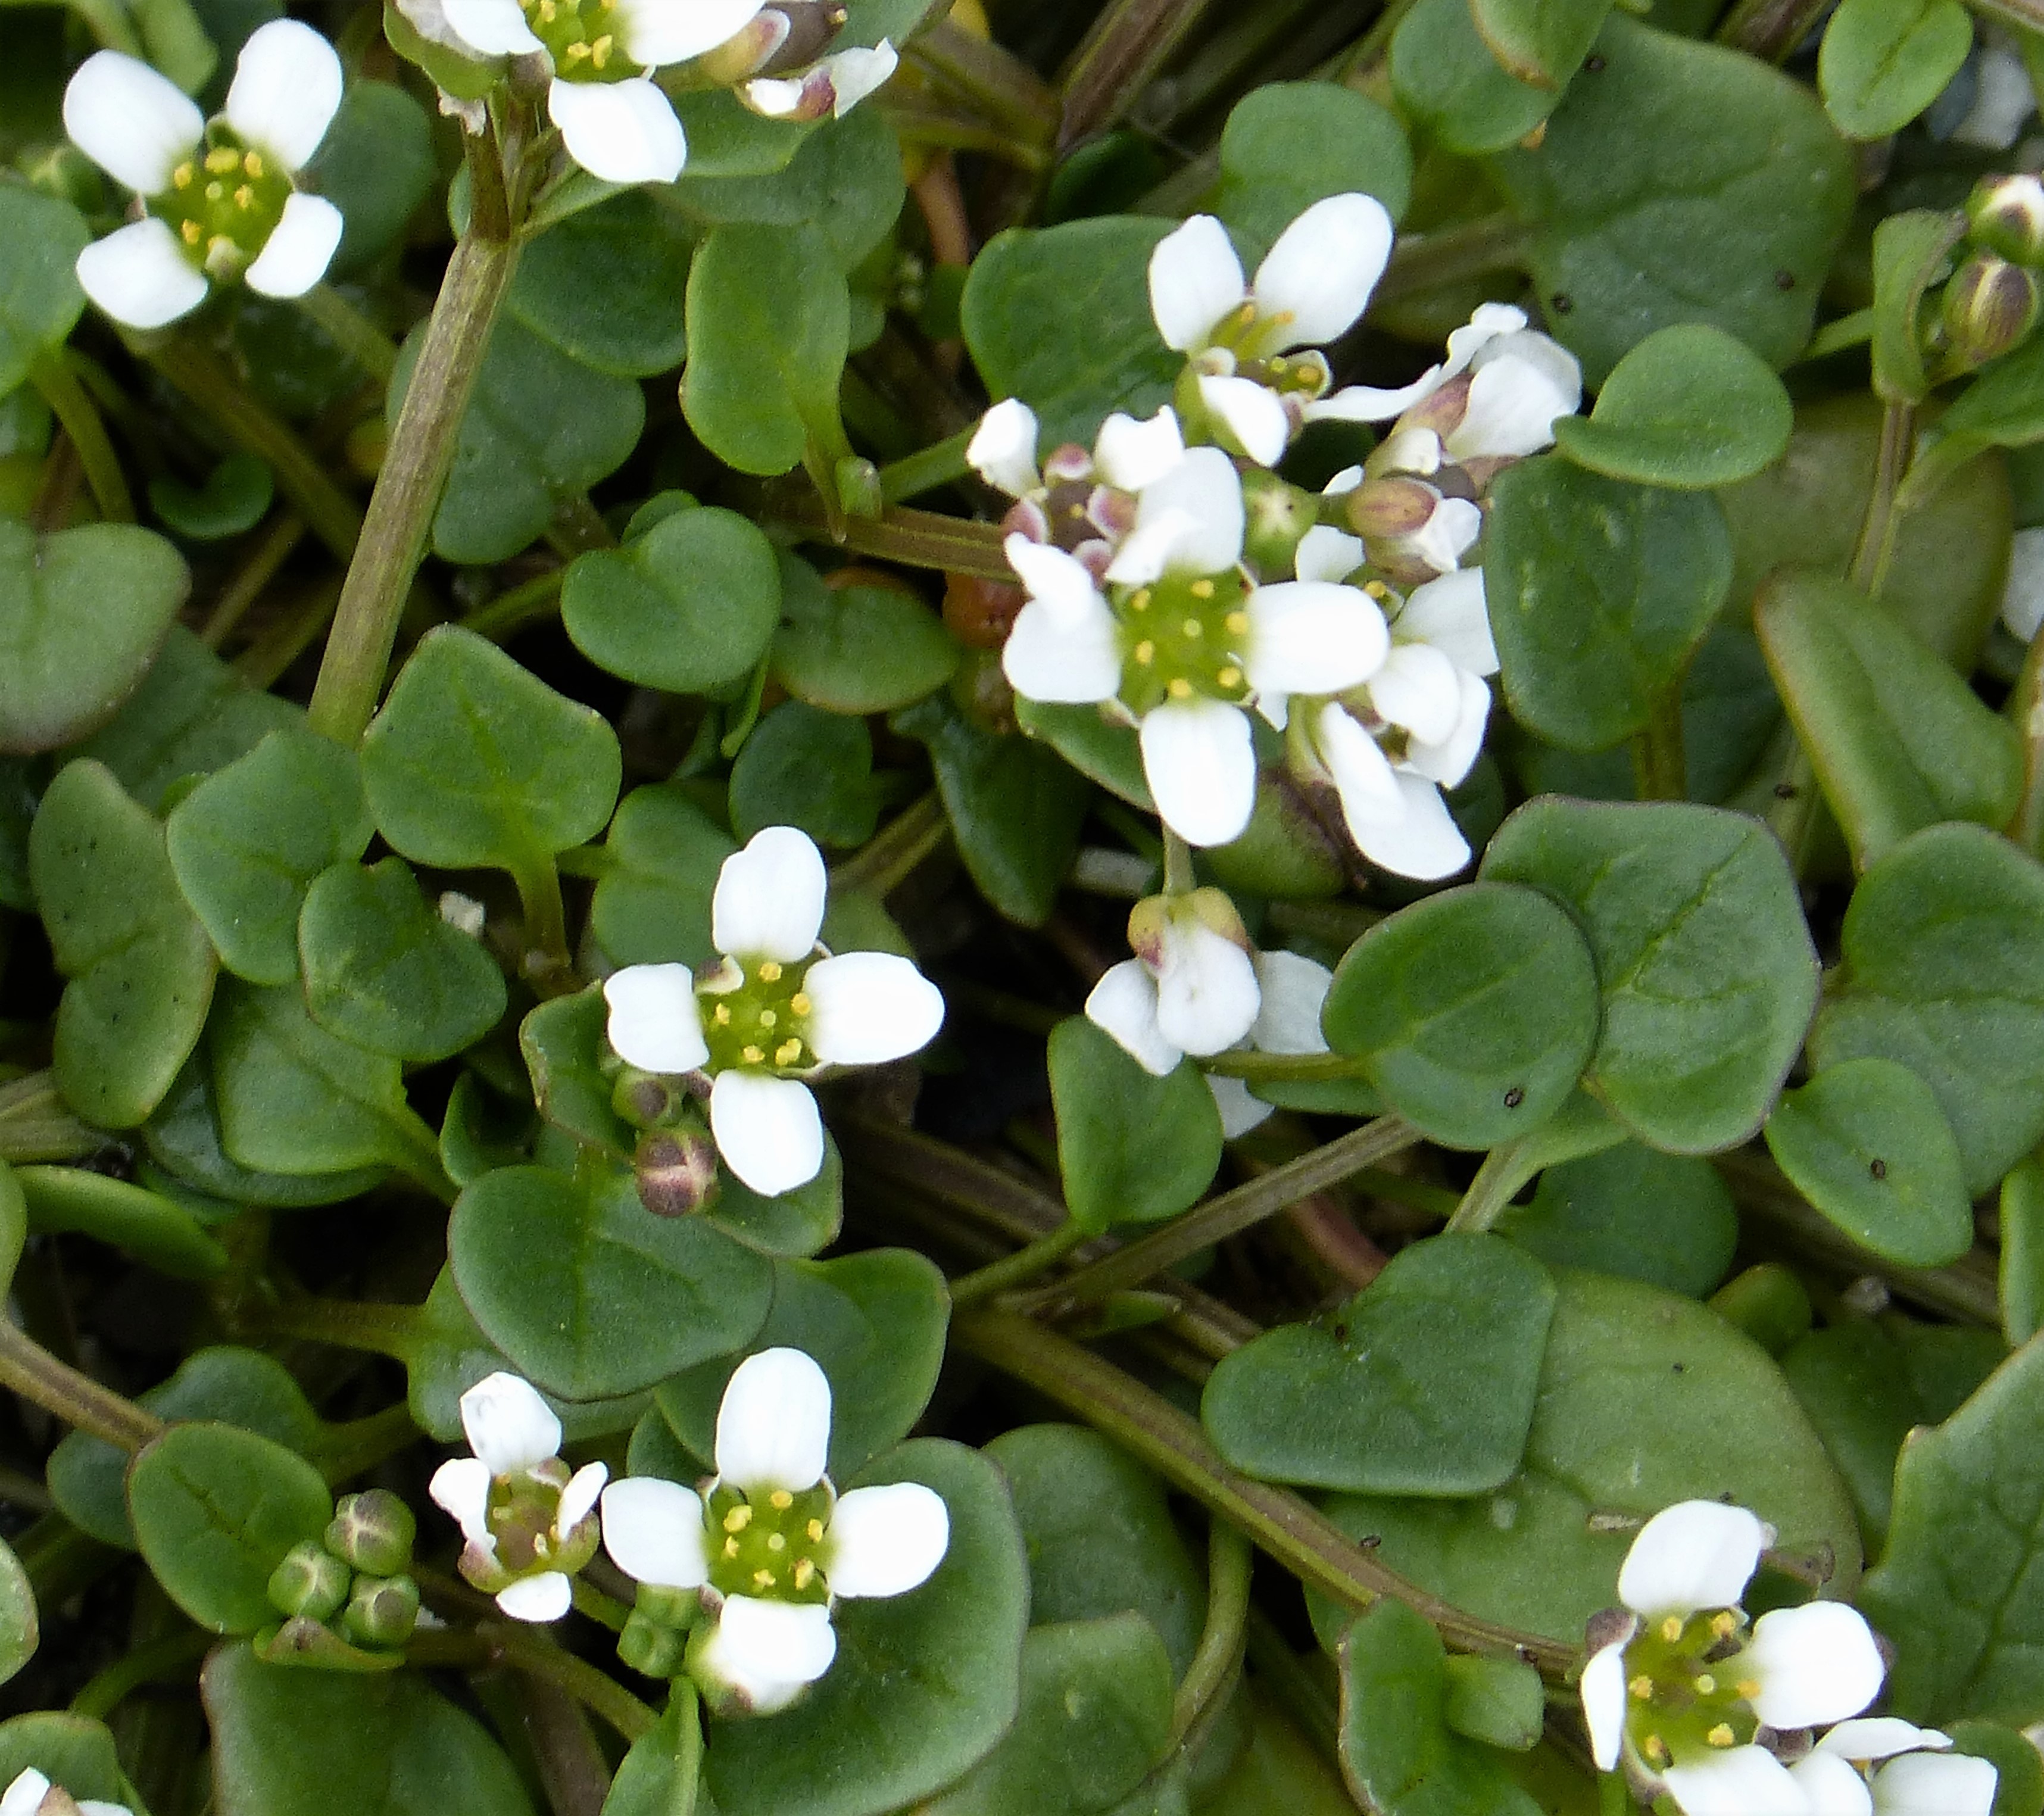 Cochlearia danica (rights holder: gailhampshire)